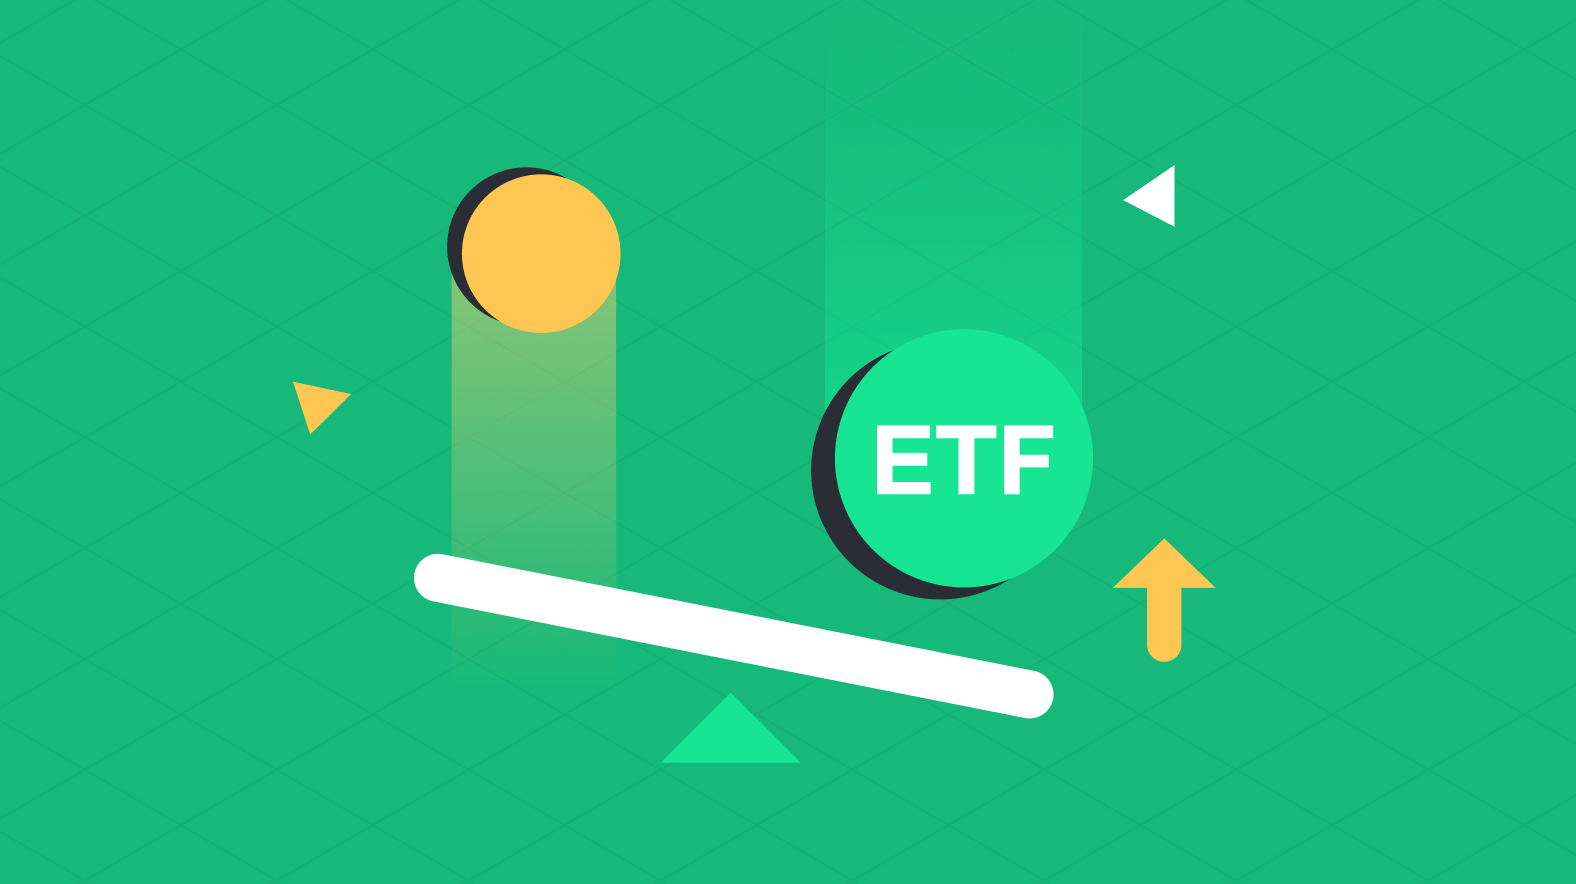 Why can leveraged ETFs be risk hedging in a market that prevents bubbles?